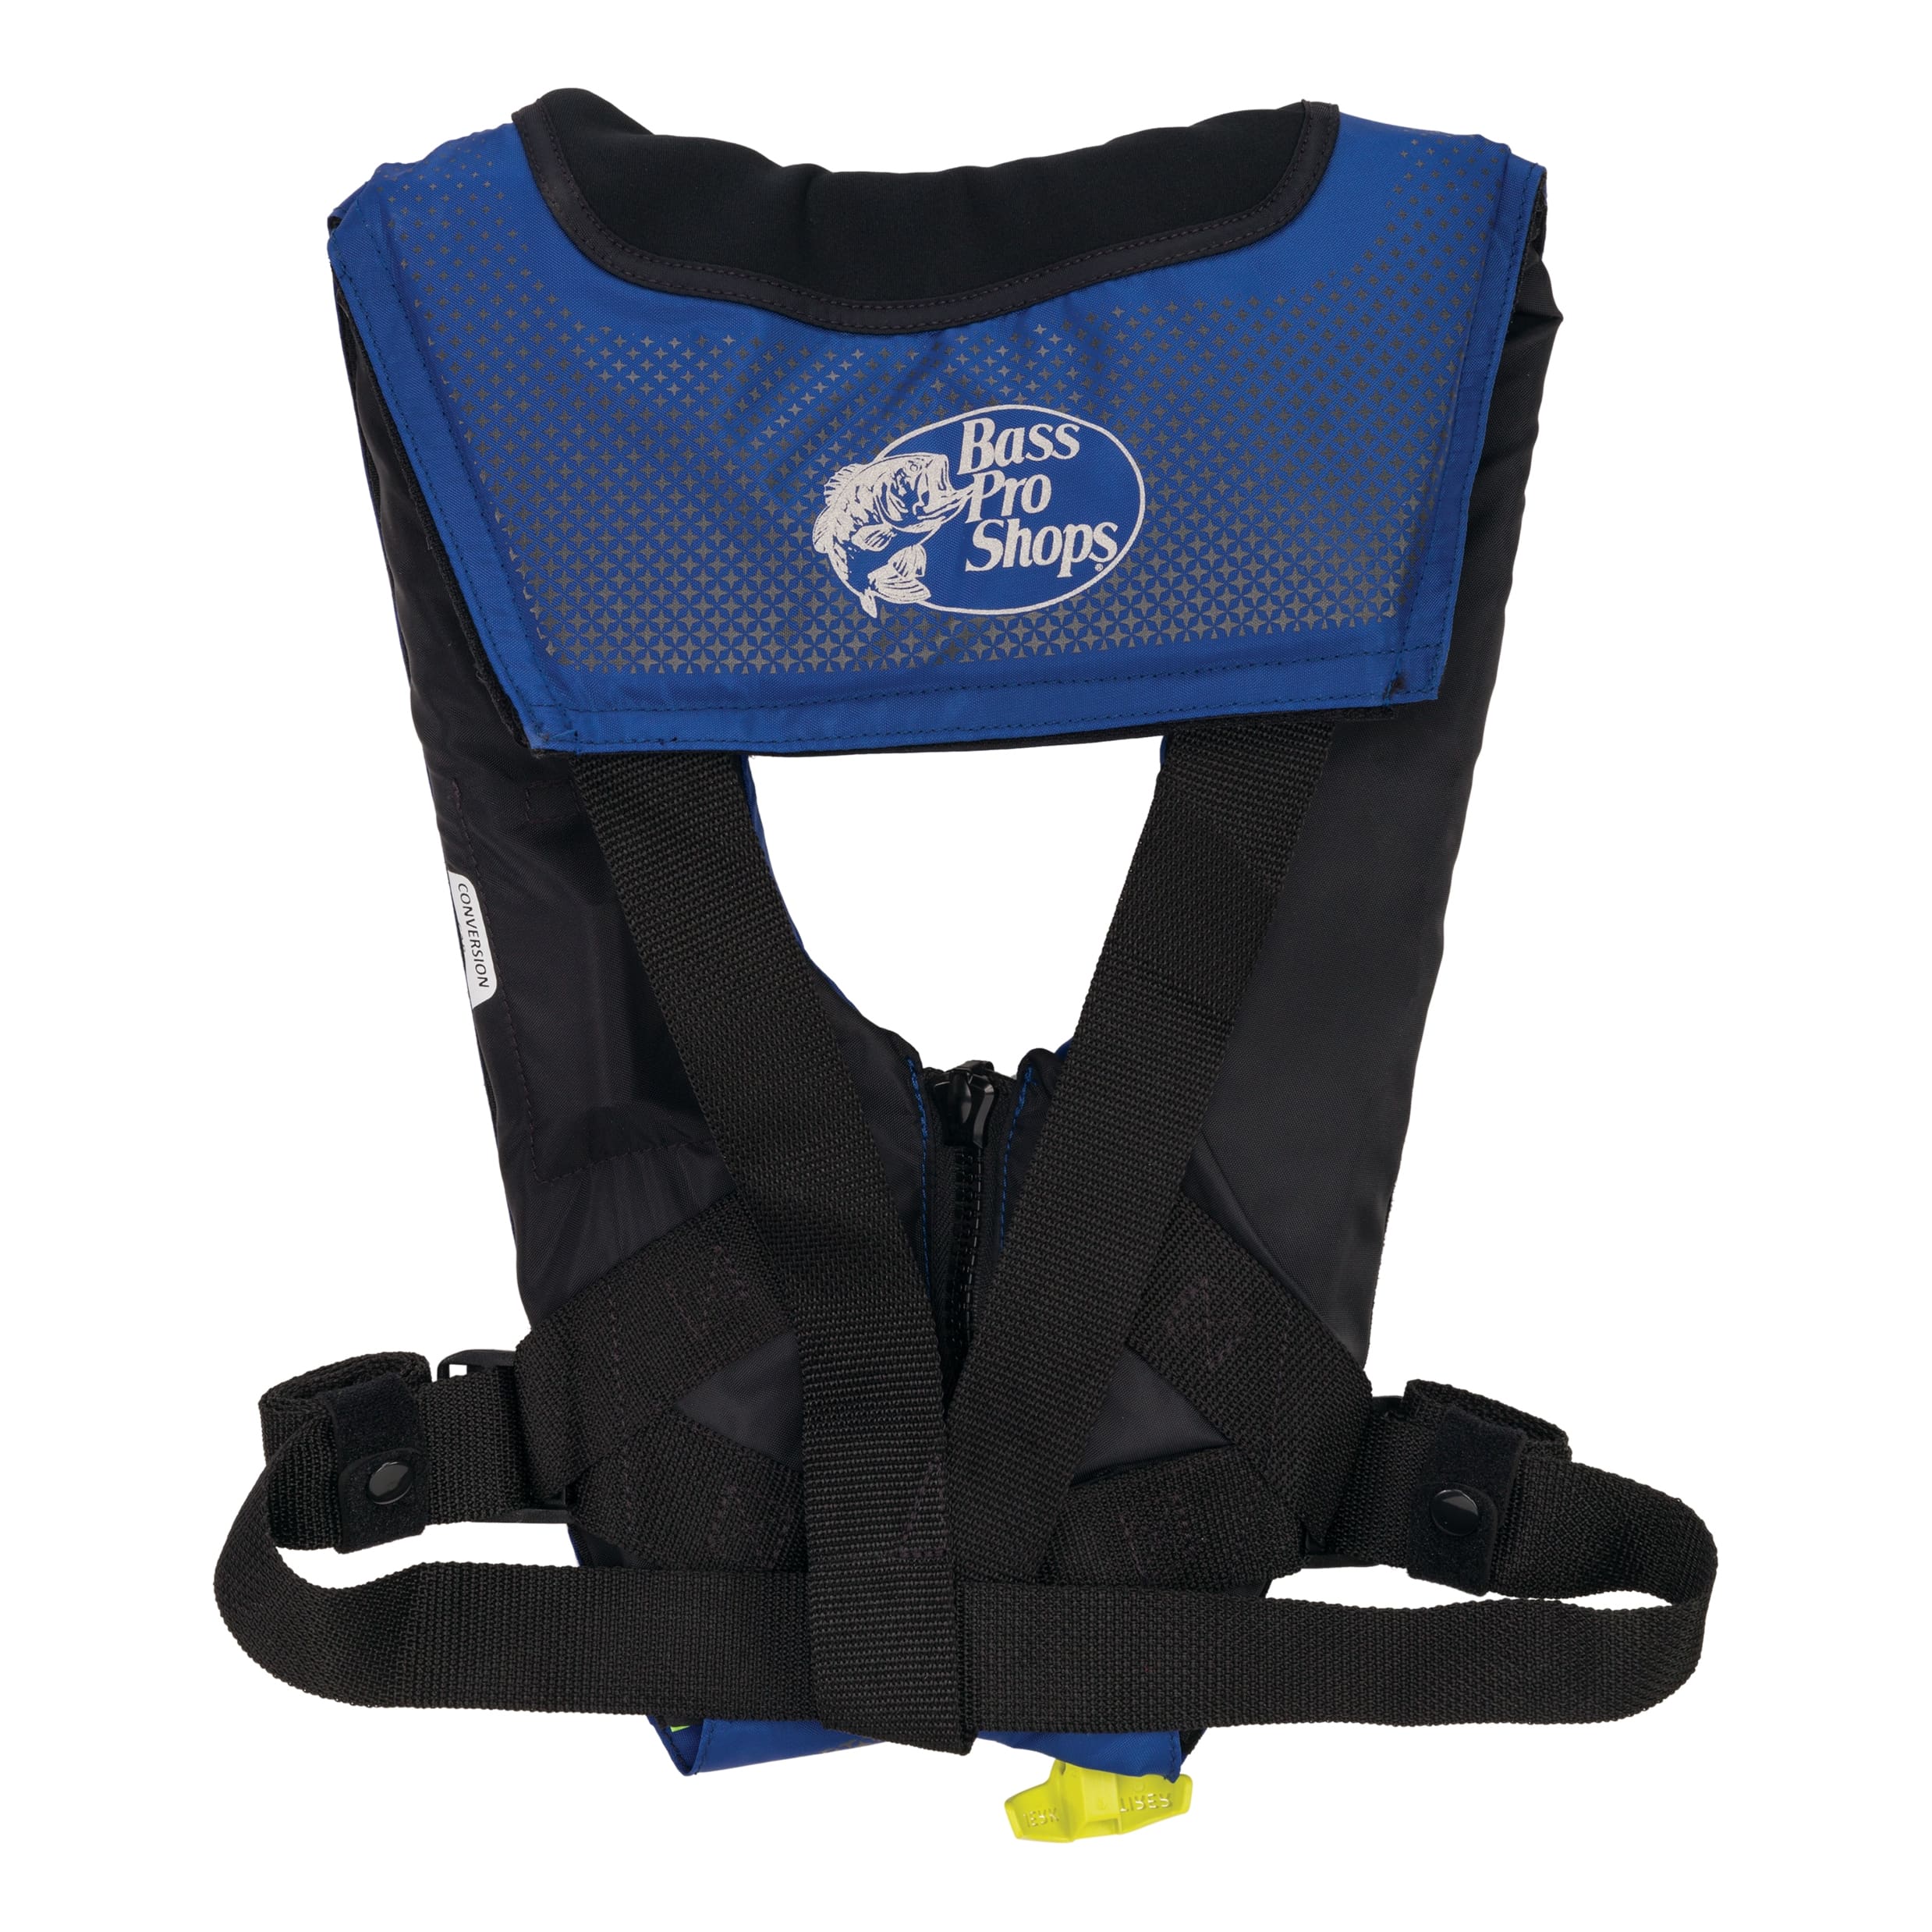 Bass Pro Shops® AM 33 All-Clear™ Auto/Manual-Inflatable Life Vest - Blue - Back View